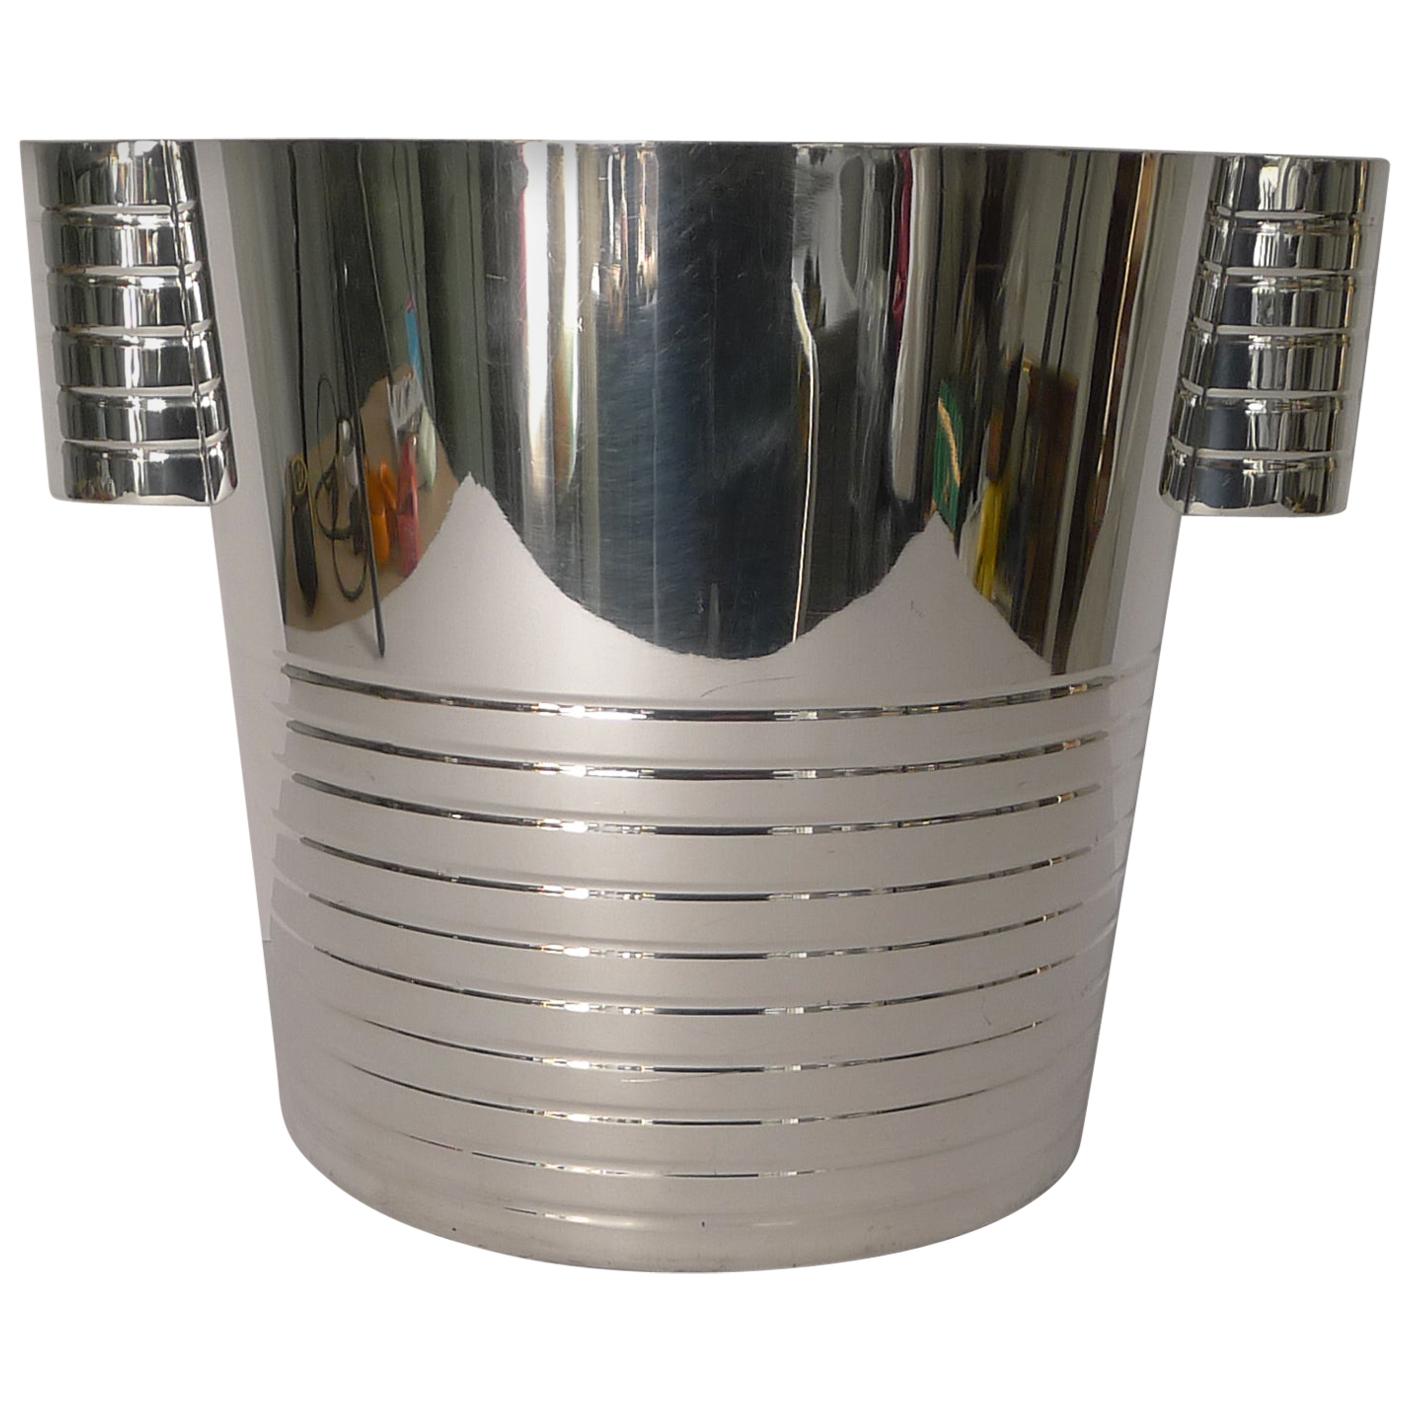 English Art Deco Silver Plated Wine Cooler or Champagne Bucket, circa 1930